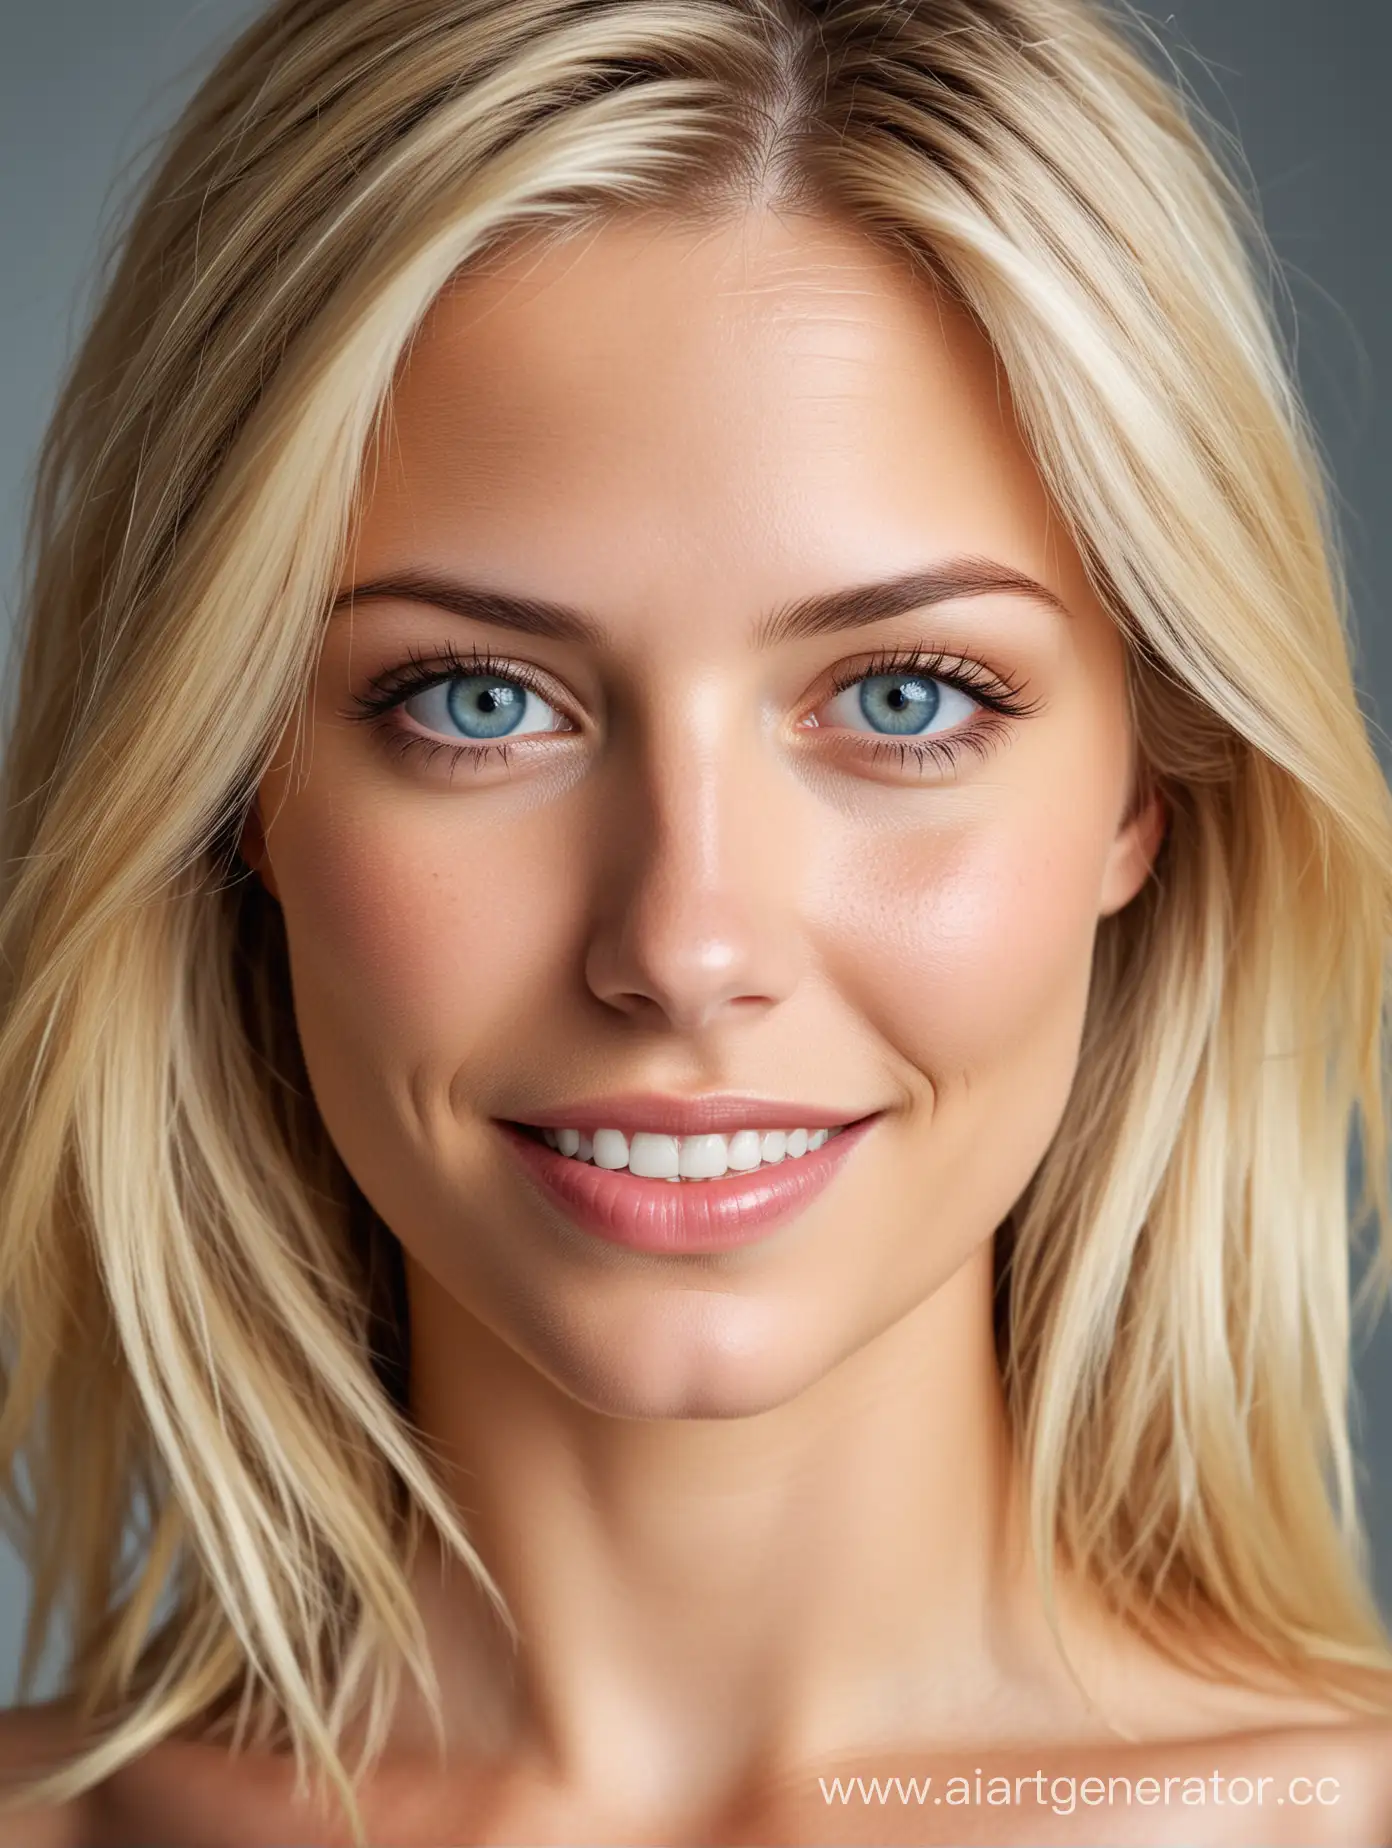 Captivating-Portrait-of-a-Confident-30YearOld-Blonde-Woman-with-Enchanting-Smile